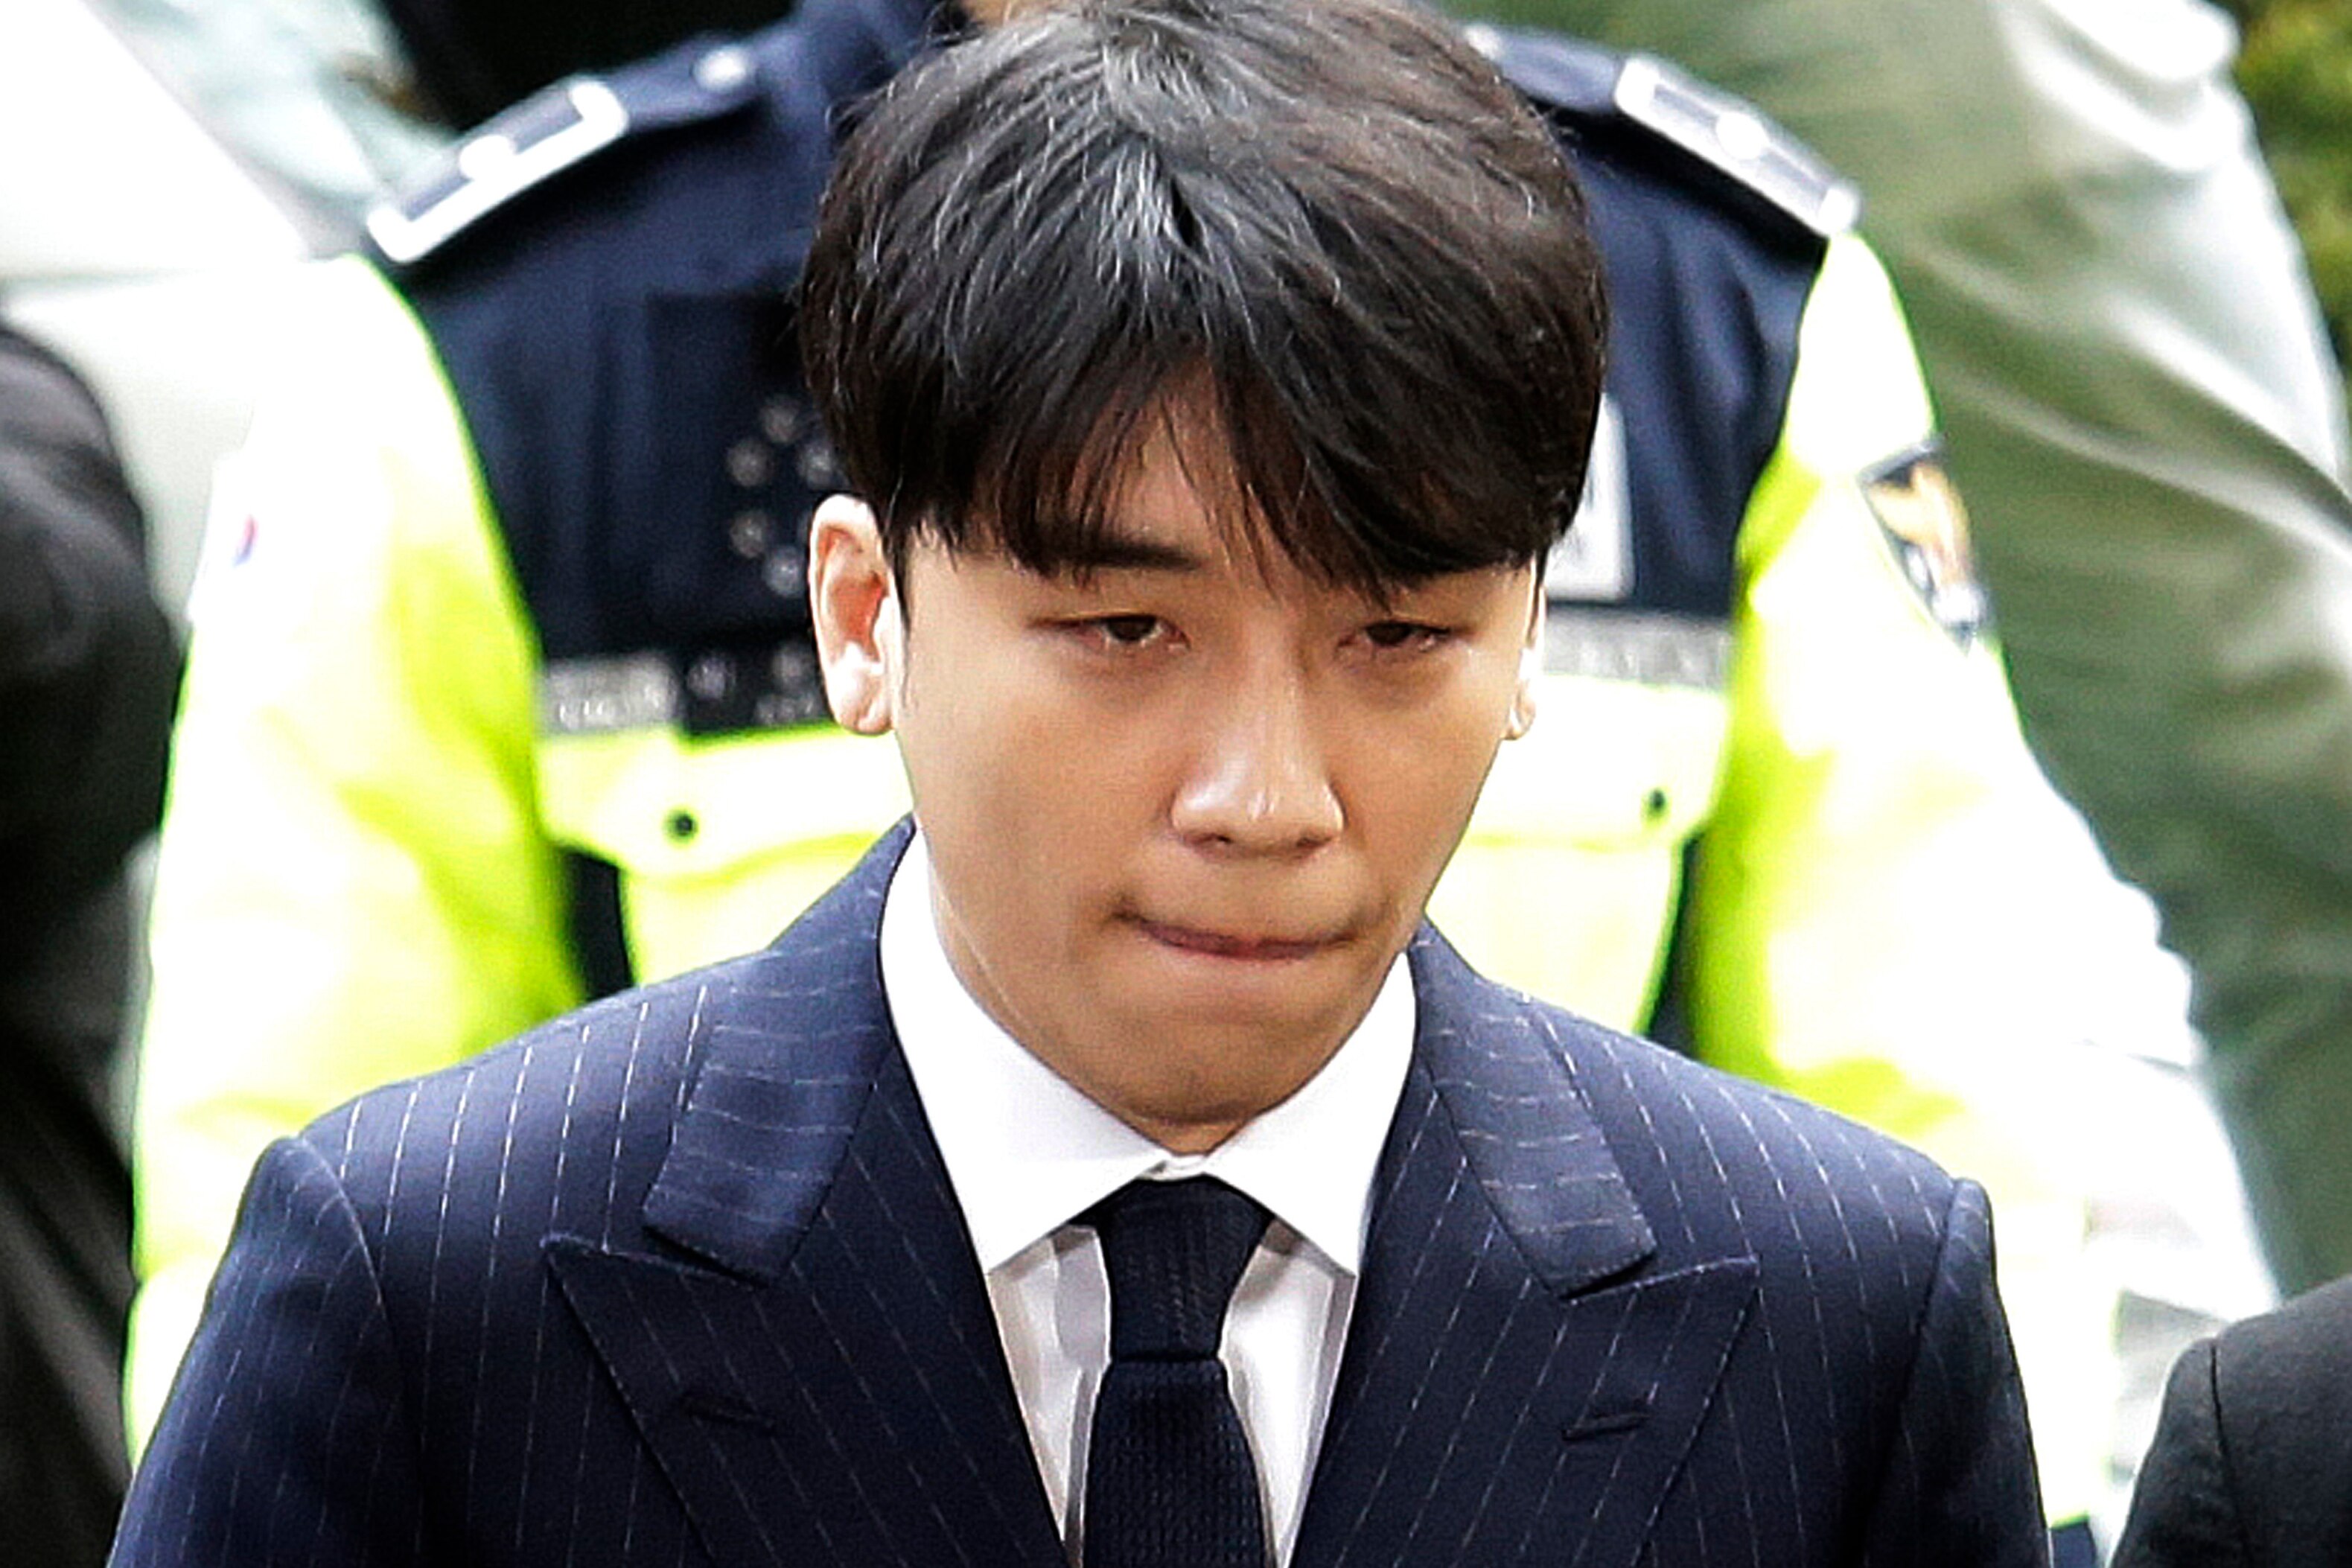 Disgraced former K-pop star Seungri from boy band Big Bang jailed for three years after conviction over prostitution and embezzling